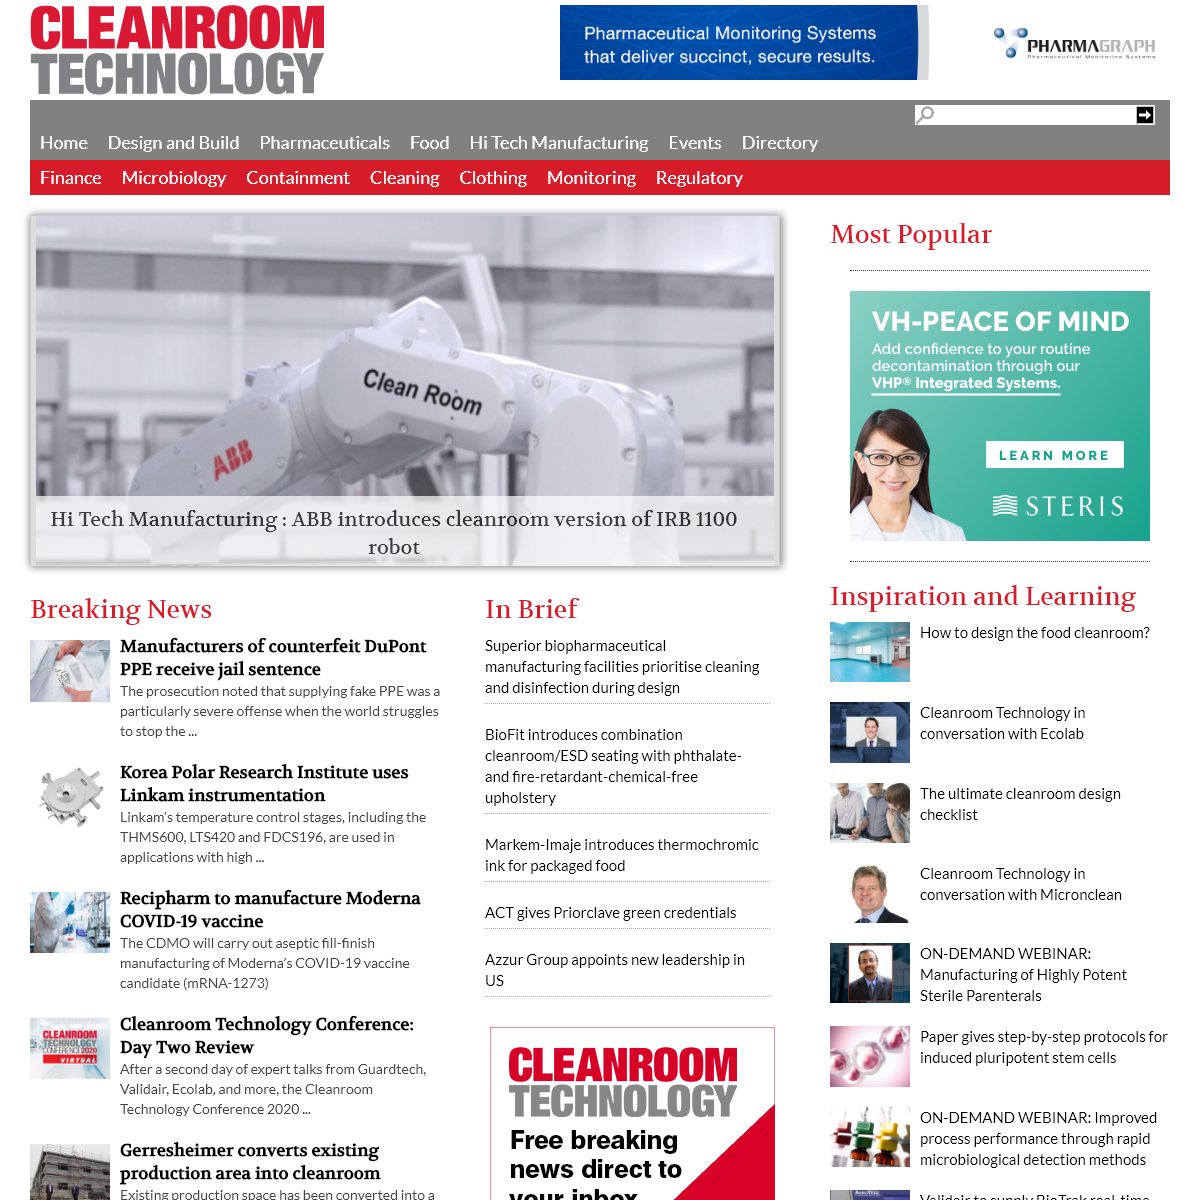 A complete backup of cleanroomtechnology.com